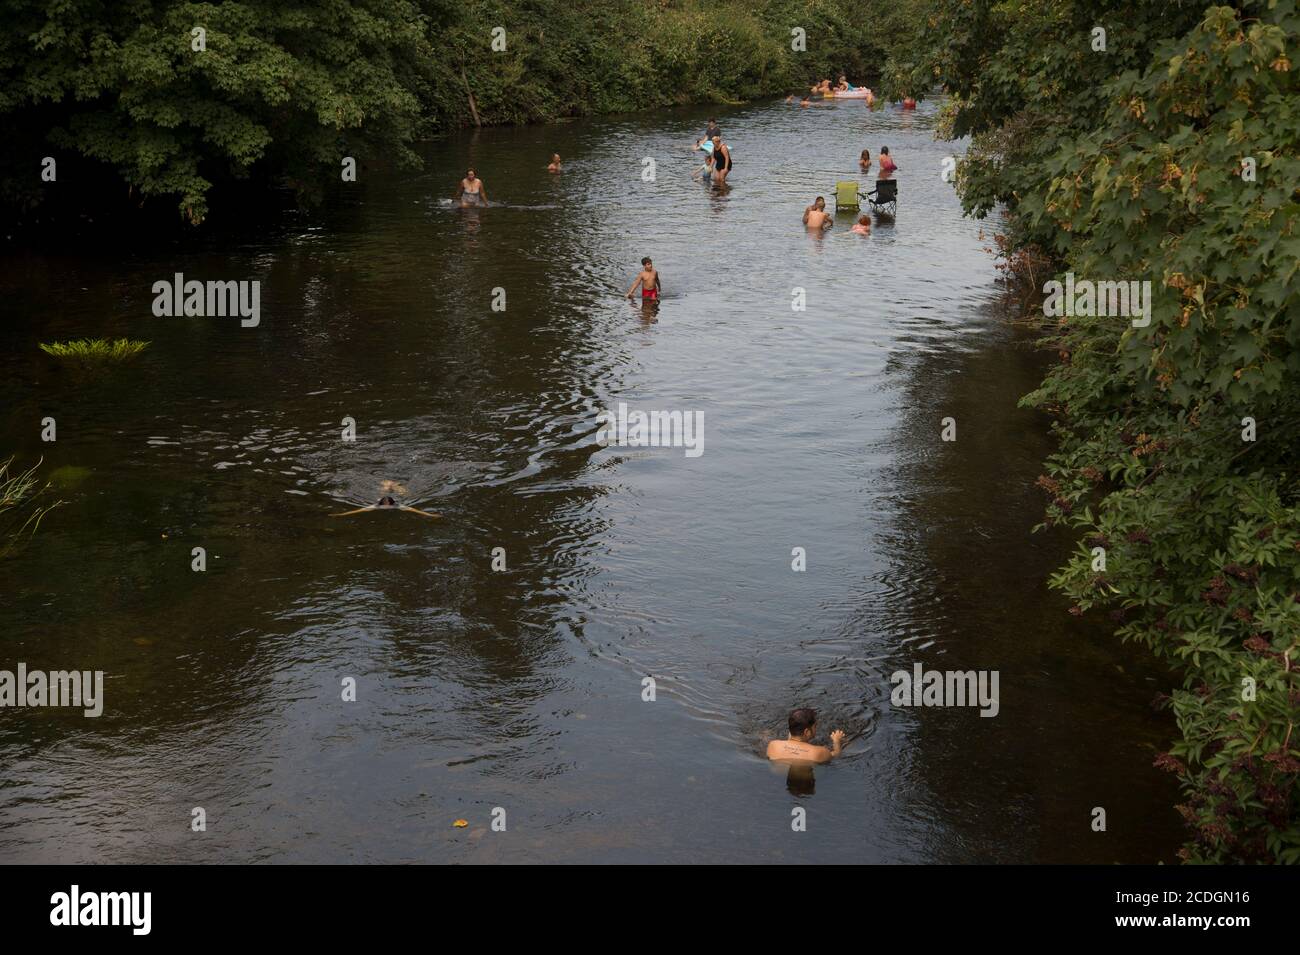 Hackney marshes on a hot August afternoon. People swim in the River Lea to cool off. Stock Photo